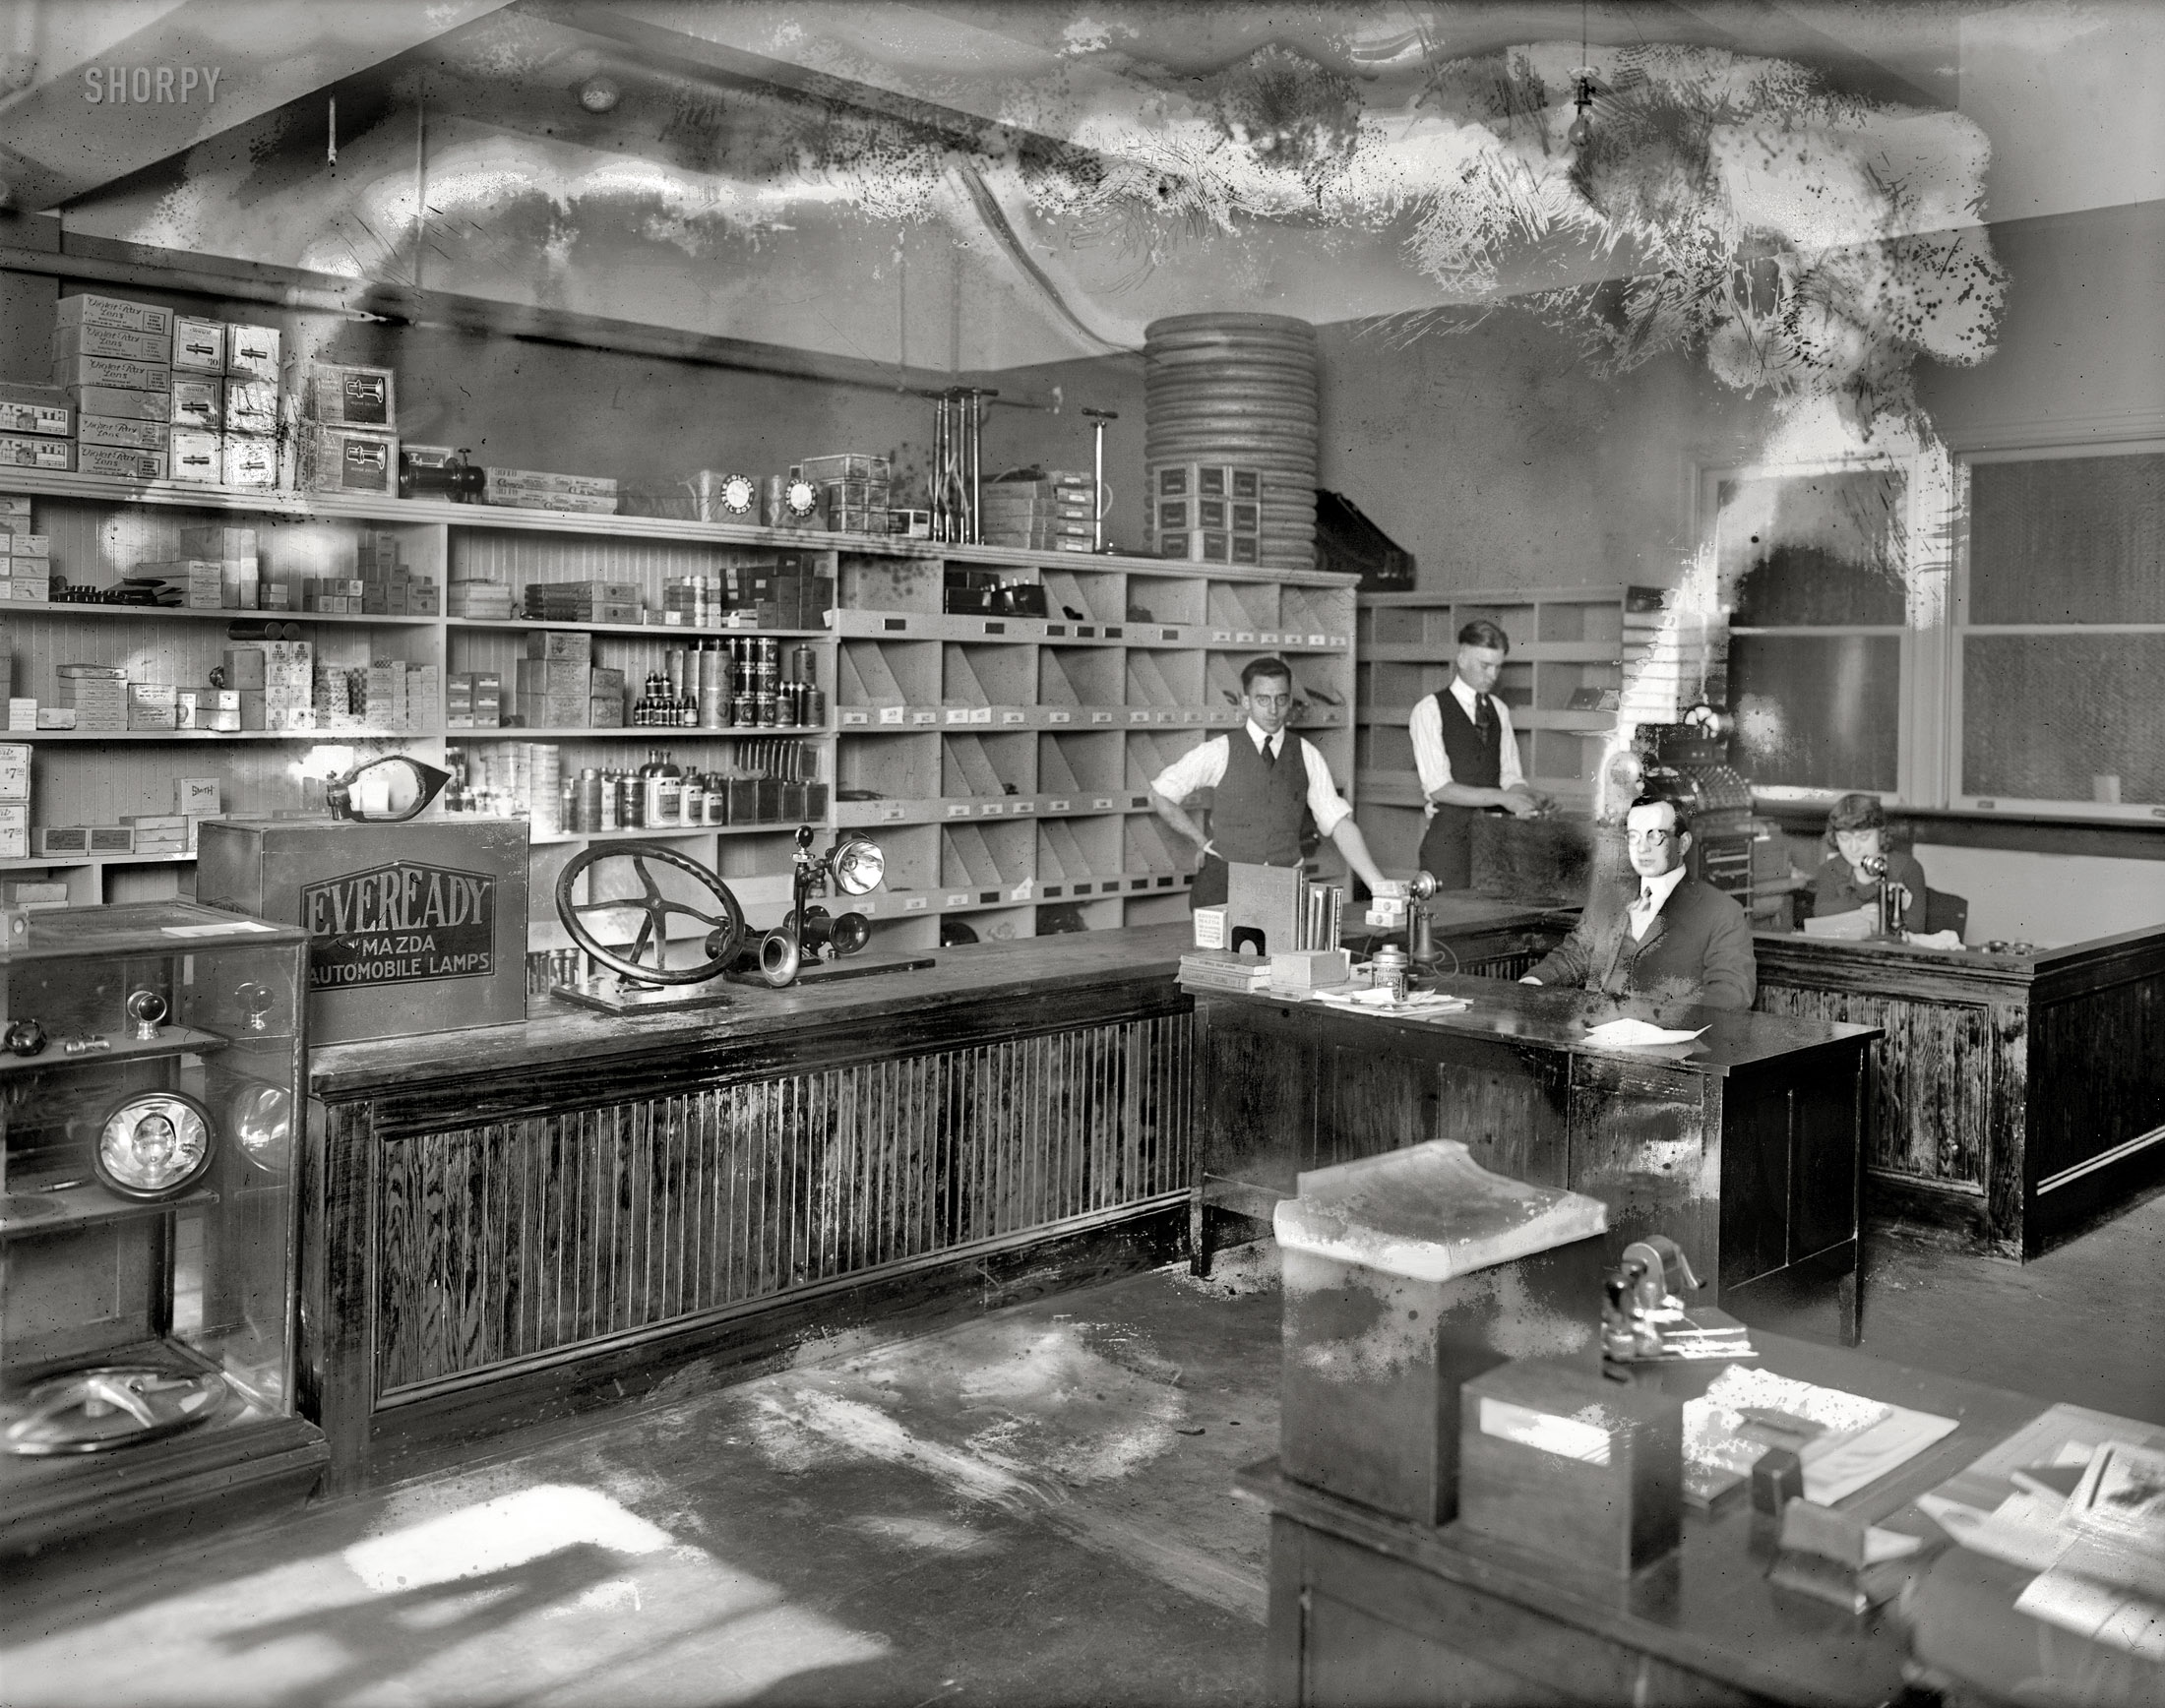 Washington, D.C., circa 1920. "Universal Auto Co., interior." The parts of old, beset by mold. National Photo Co. Collection glass negative. View full size.